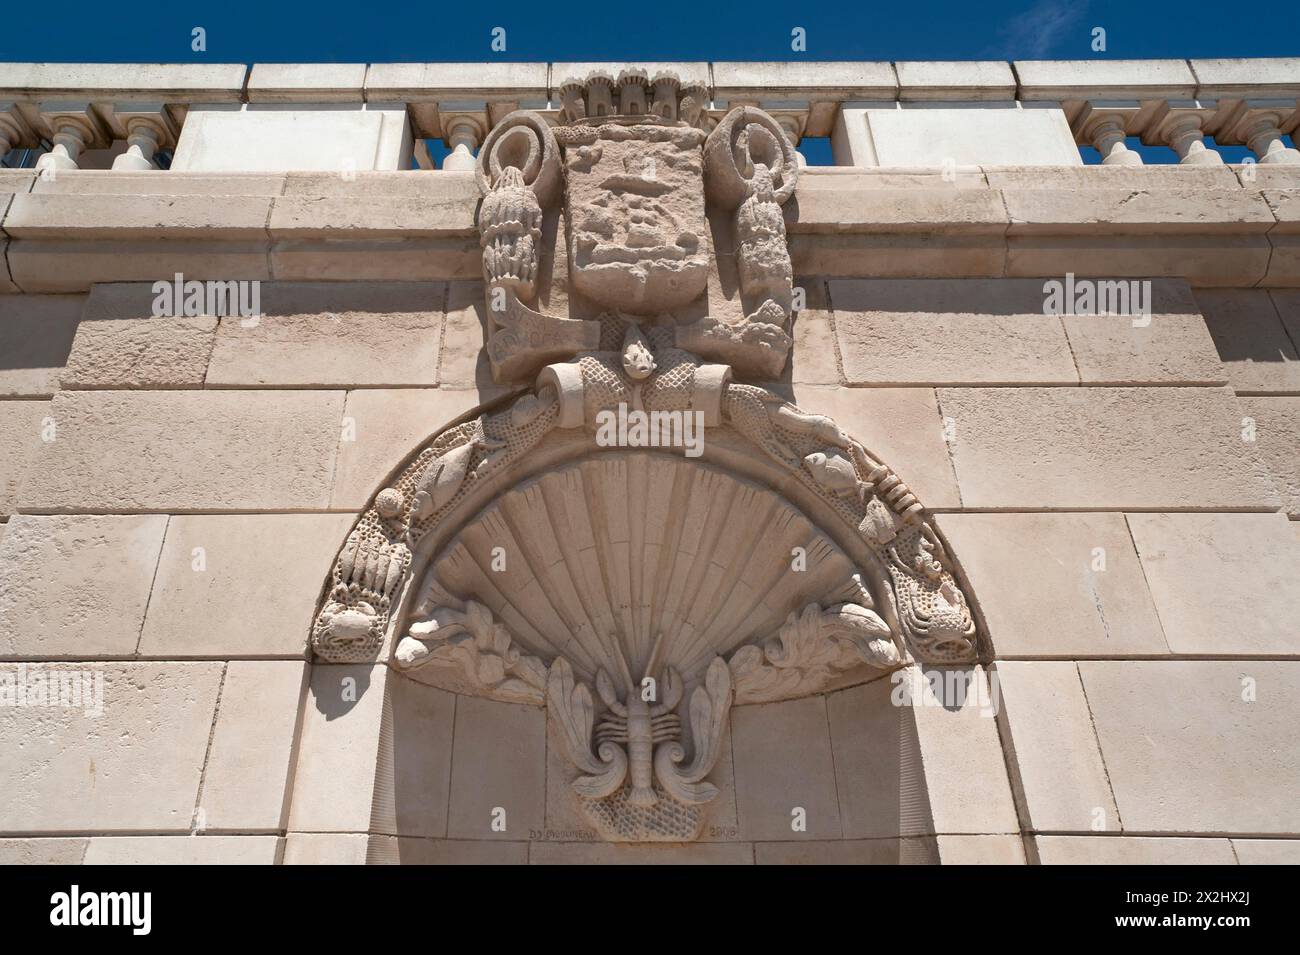 Relief ornaments above an old fountain, Les Sables-d'Olonne, Vandee, France Stock Photo